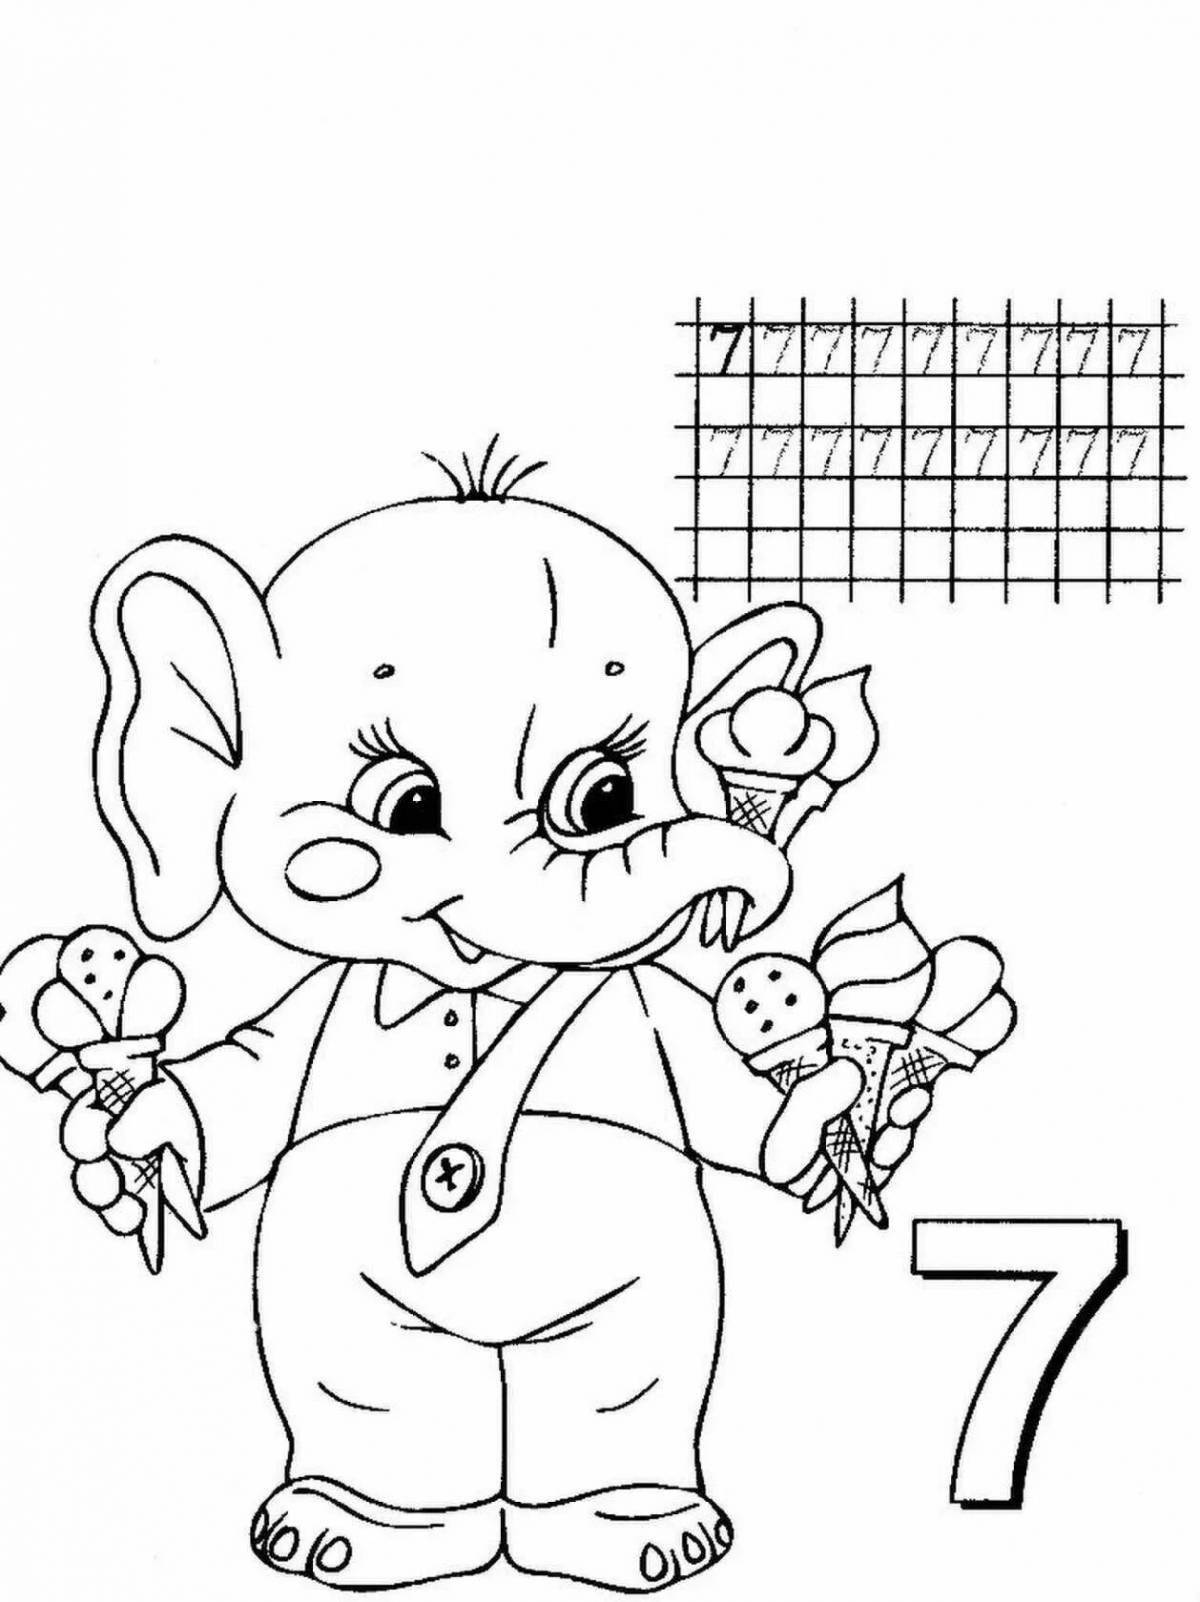 Colorful-engagement coloring page 0 class